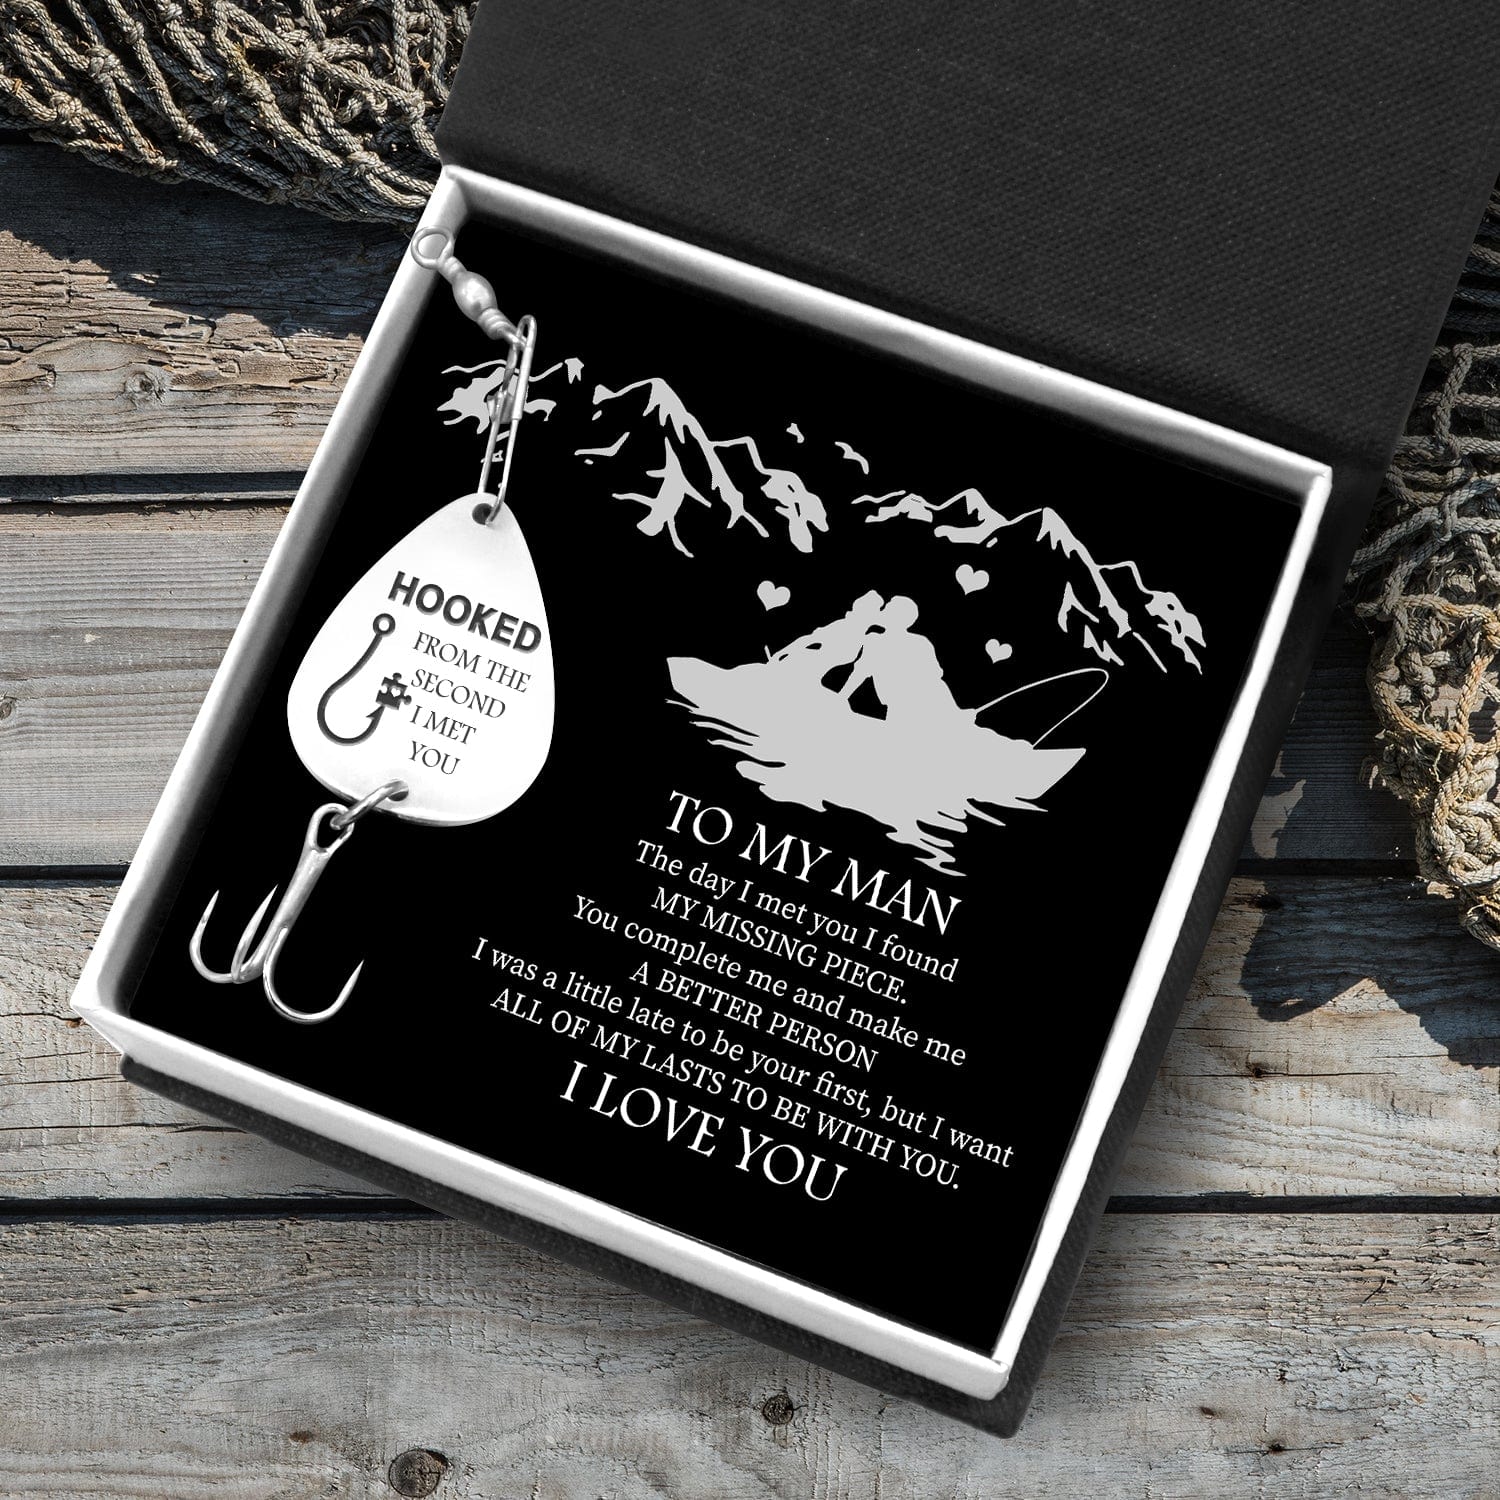 Catch of a Lifetime! Engrave Your Love on His Hook from Wrapsify.com